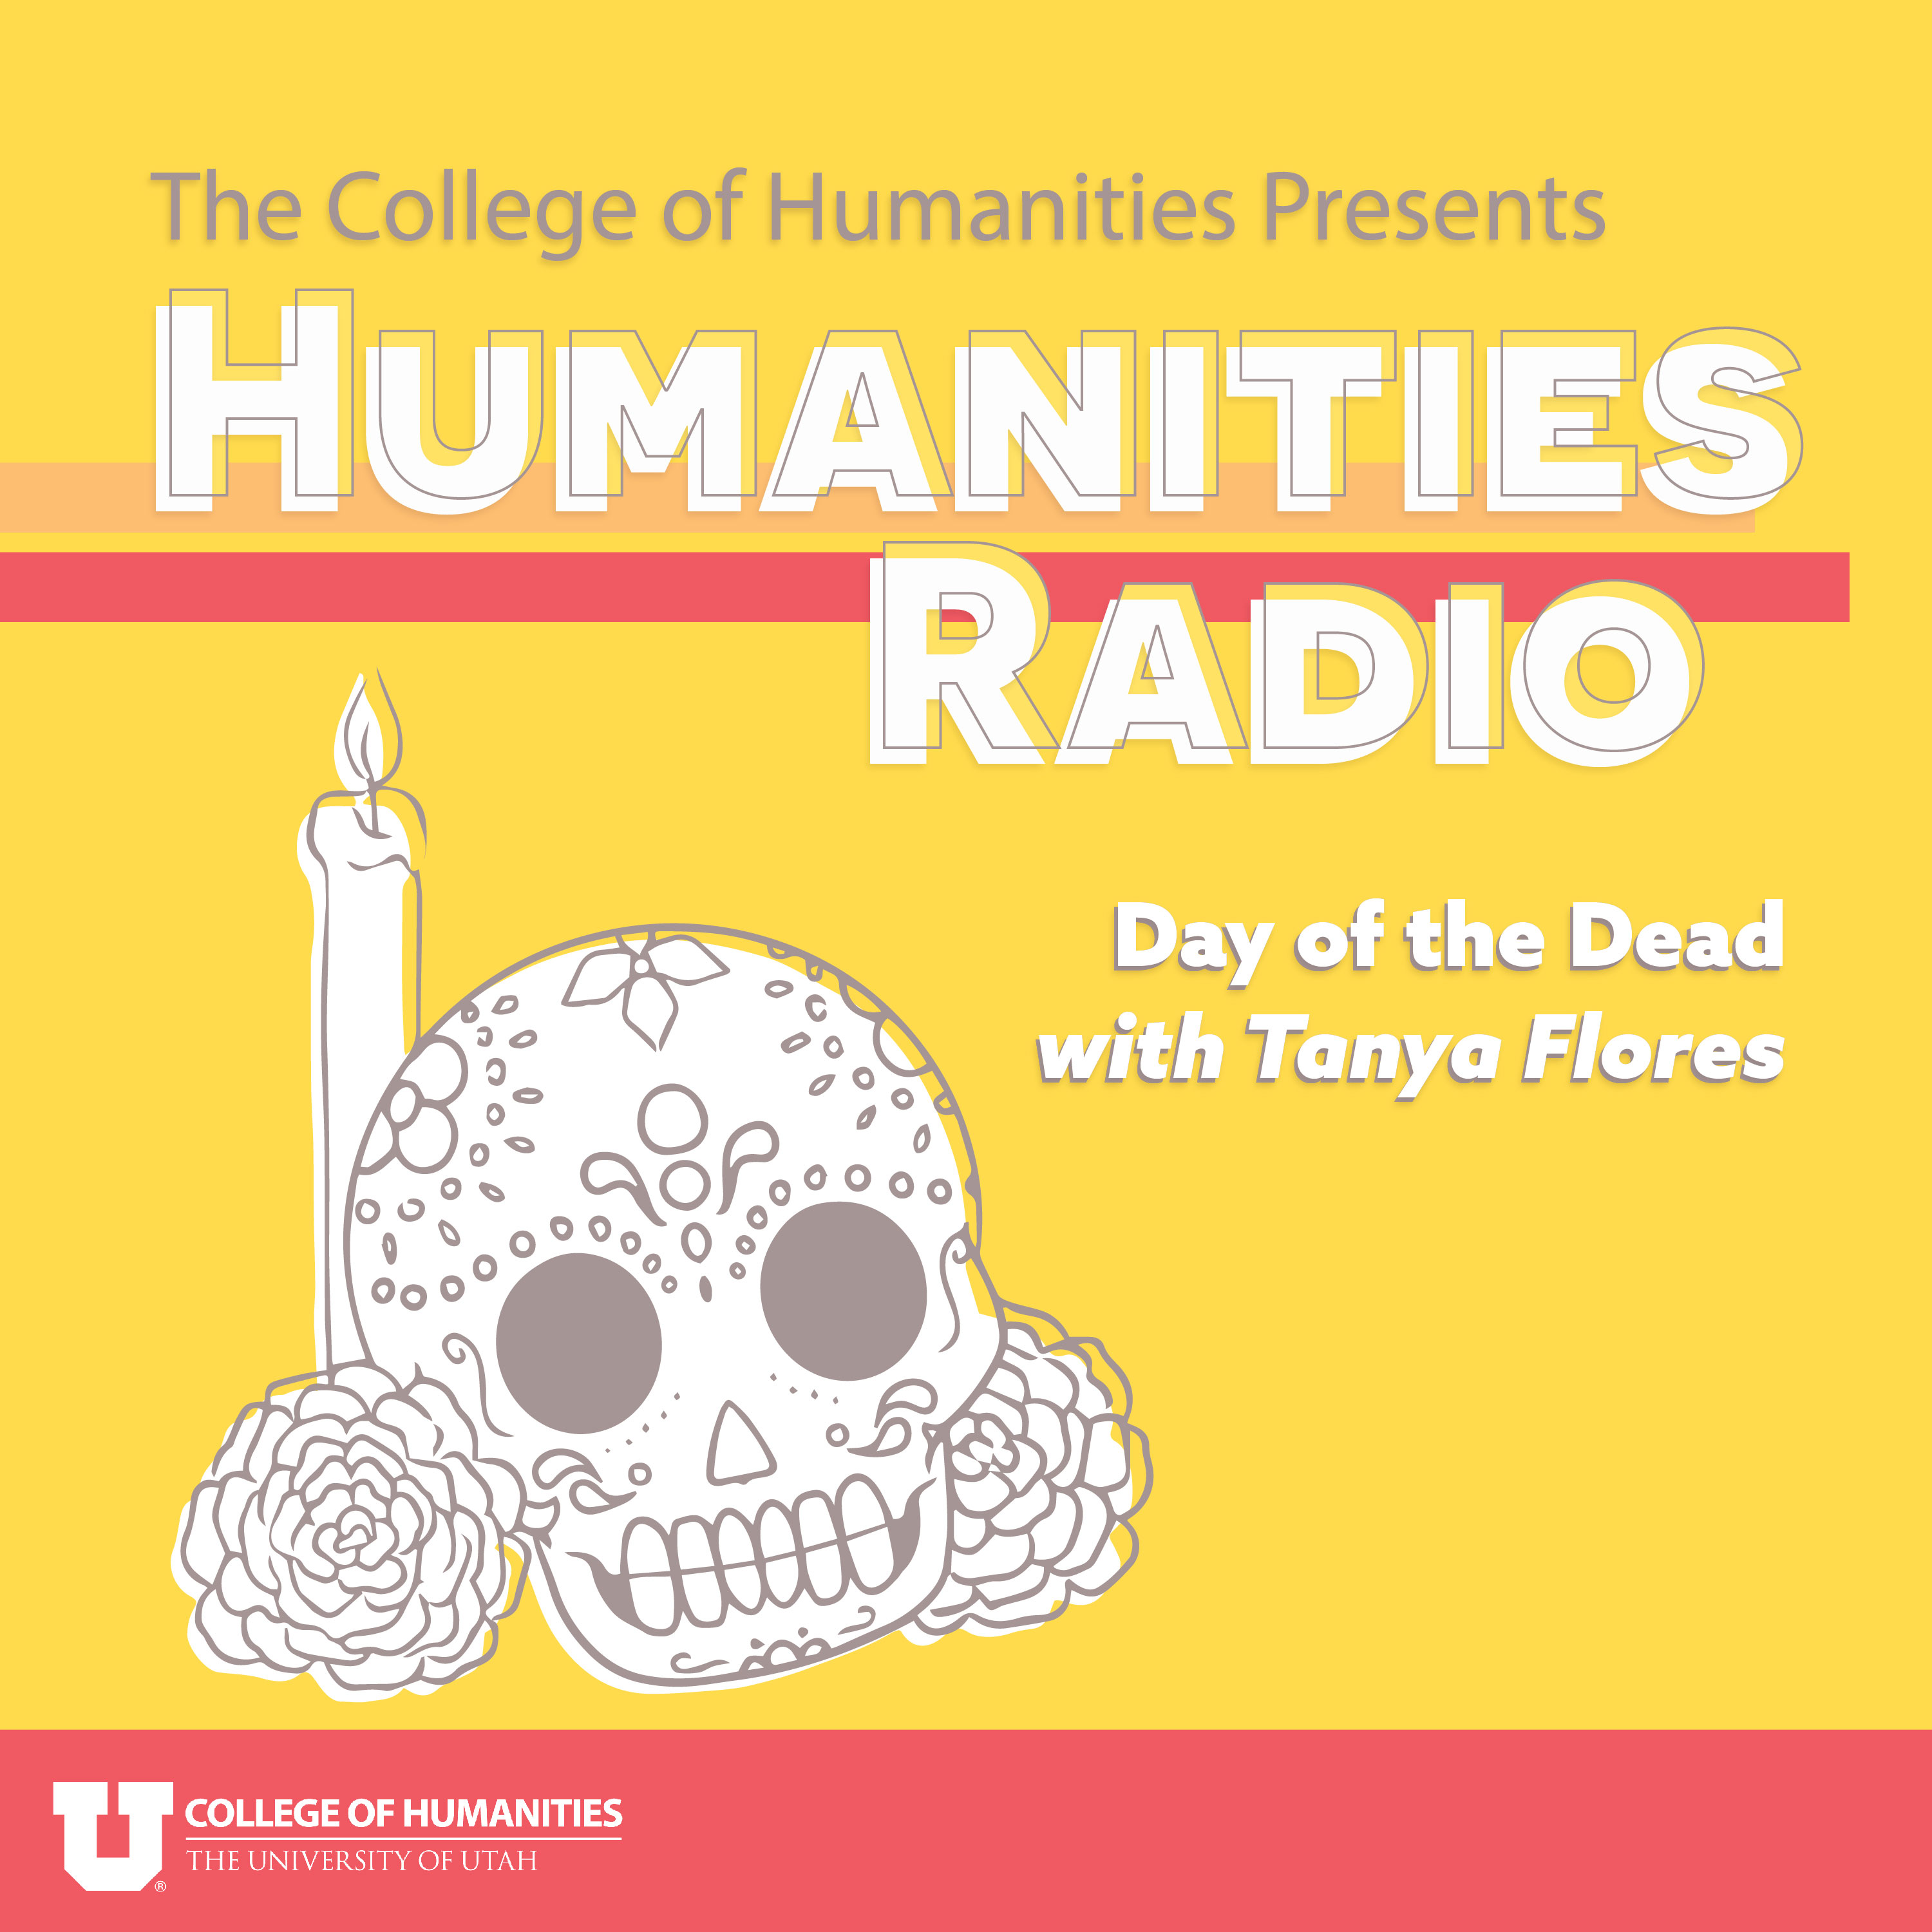 Season 4, Episode 3 - Day of the Dead with Taunya Flores